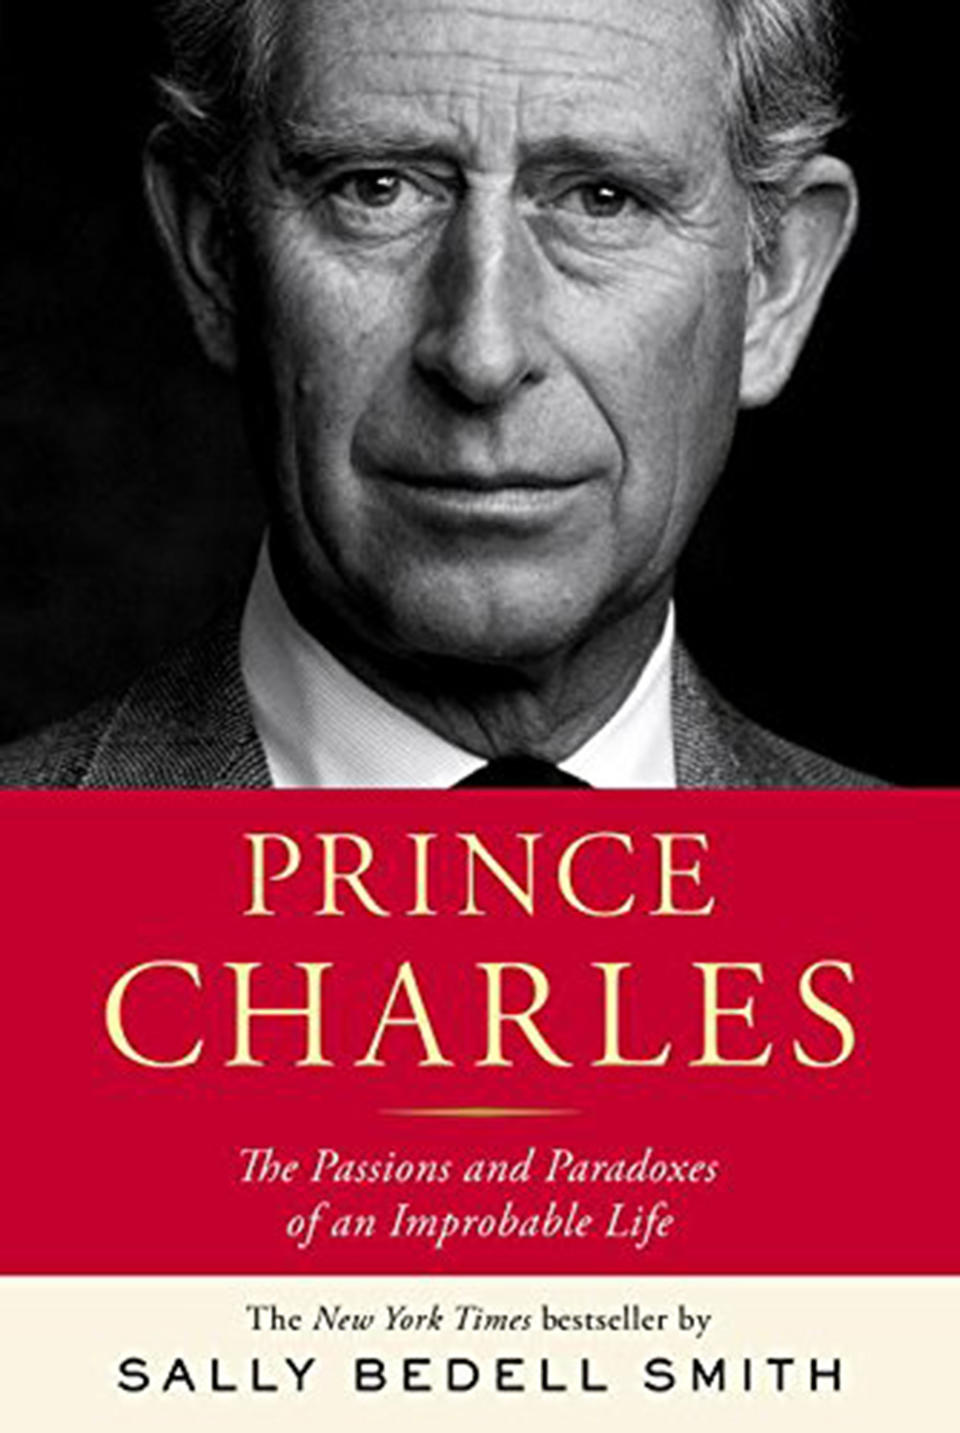 Prince Charles: The Passions and Paradoxes of an Improbable Life 
 by Sally Bedell Smith